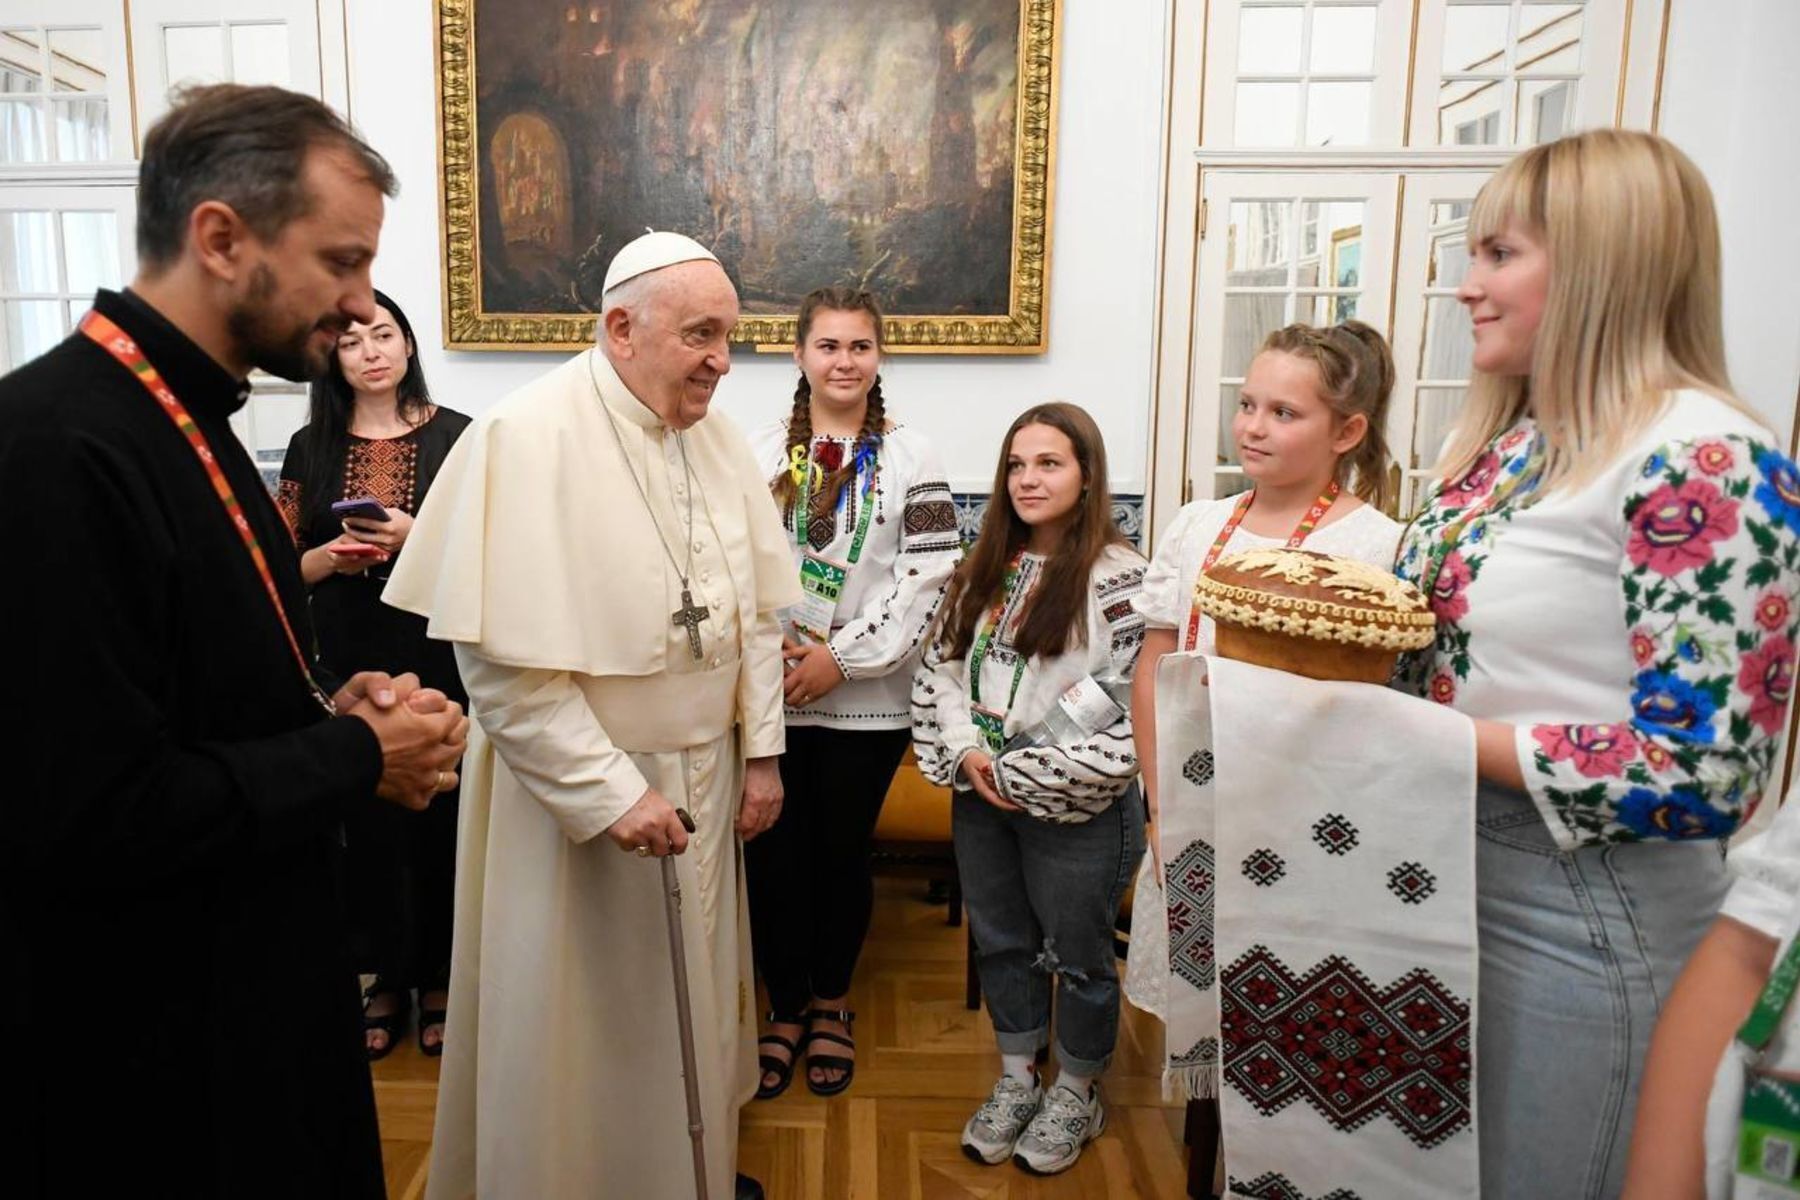 Pope apologises to Ukrainian youth for not being able to influence the situation in Ukraine